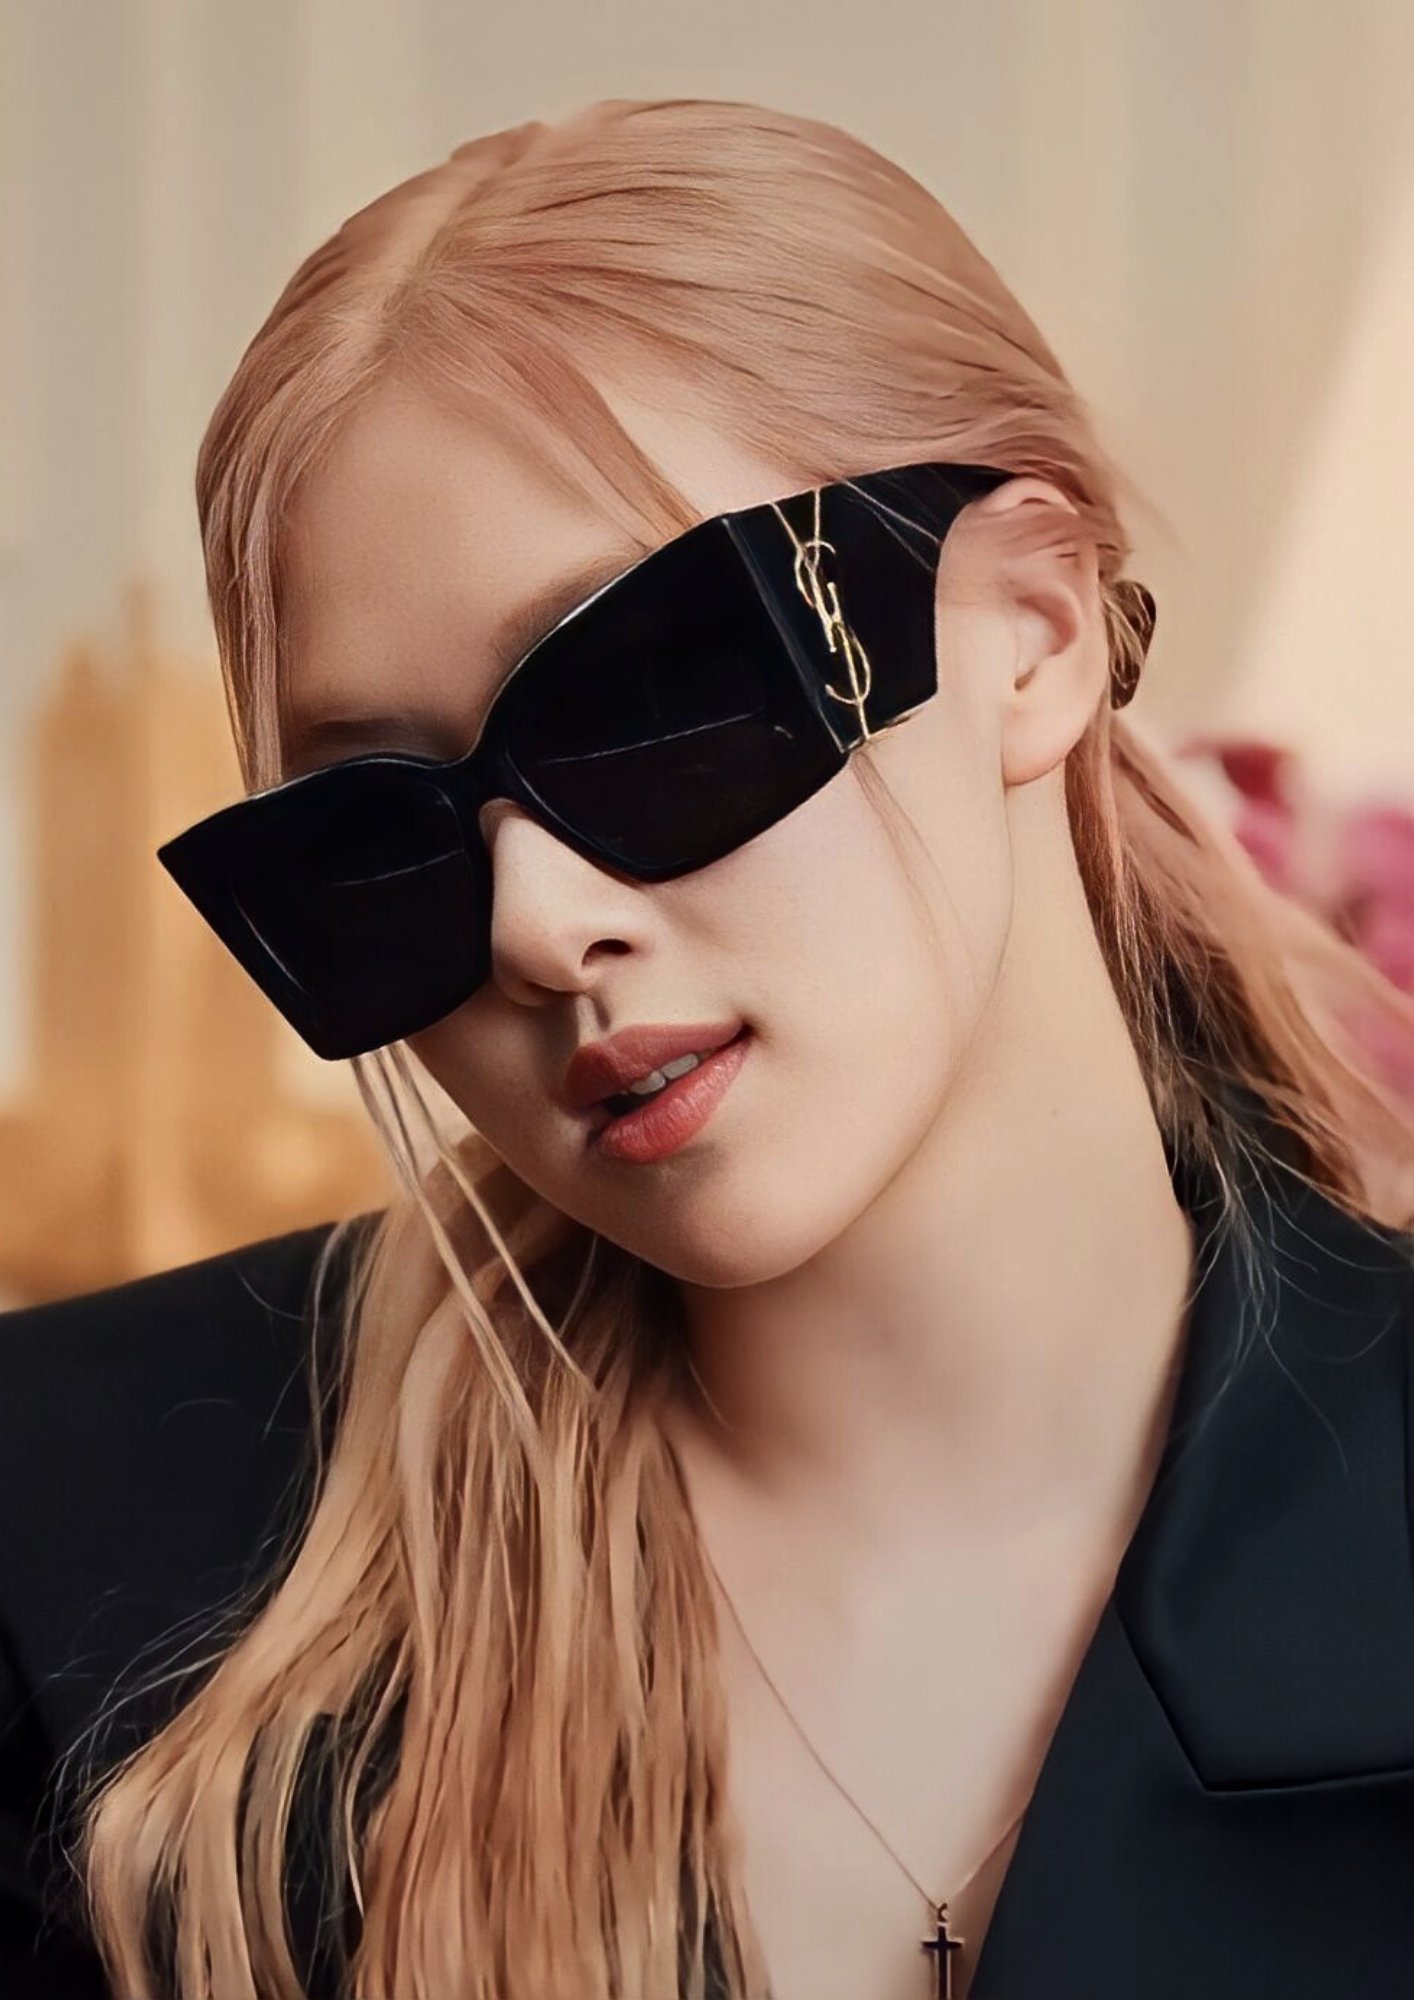 ROSÉ DIARY ✨ on X: "#ROSÉ wearing Saint Laurent SL M119 BLAZE shades in her  "What's in my YSL bag" video. WATCH HERE: https://t.co/zf3BQ5iM1r  #ROSÉxSaintLaurent #SaintLaurent @YSL https://t.co/vDxXKdxiBY" / X